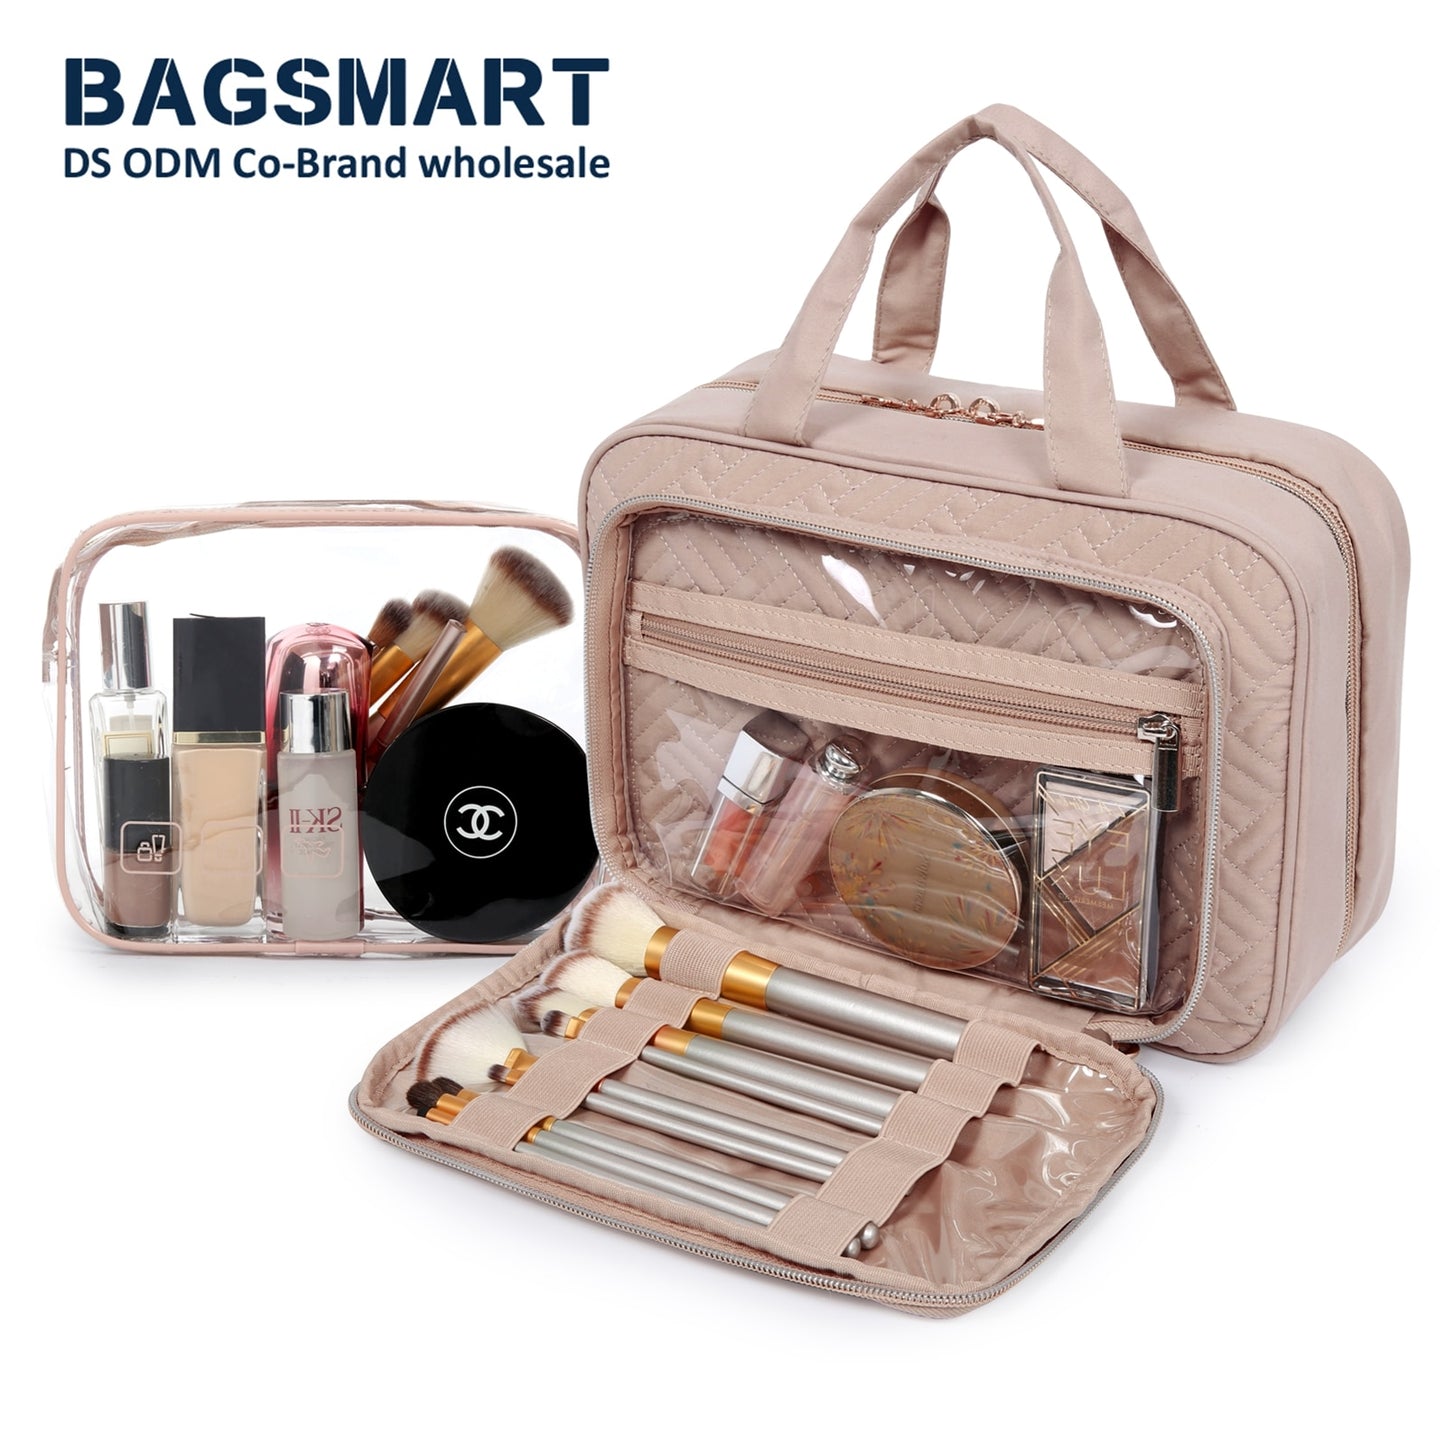 BAGSMART 30 Pieces Wholesale Toiletry Bag Travel Makeup Organizer Water-resistant Cosmetic Bag for Shampoo Full Sized Container